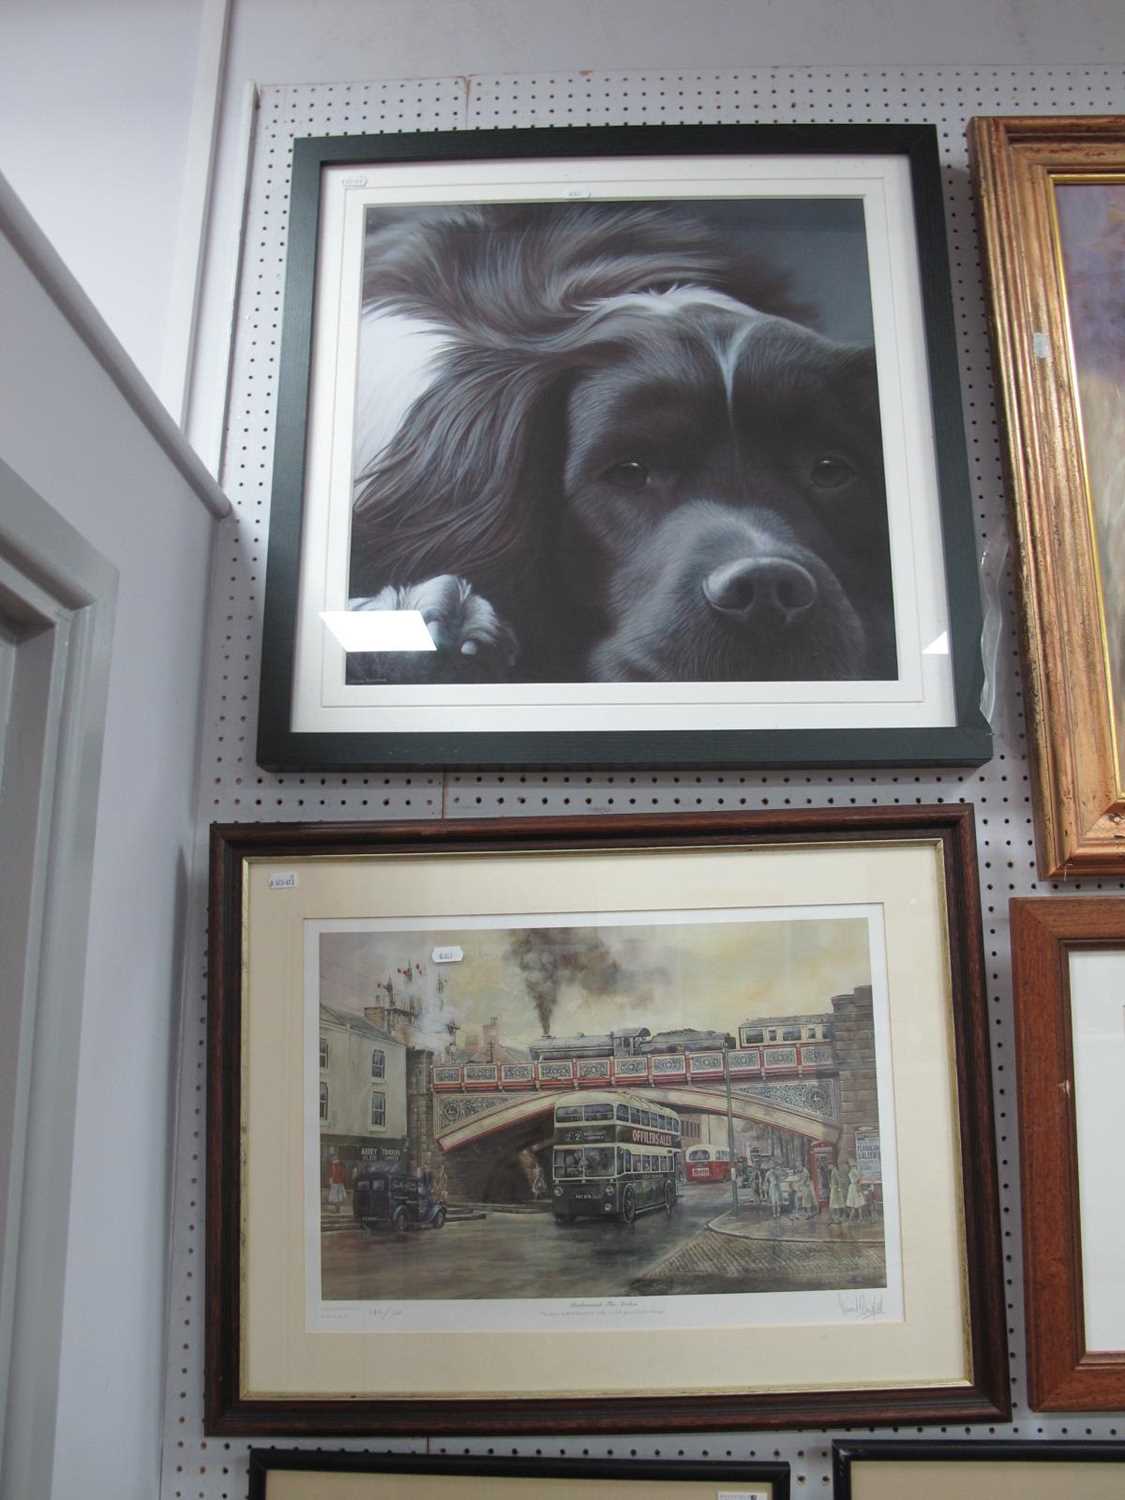 Nigel Hemming, large signed print of a dog, with three other signed limited edition street scenes, - Image 2 of 2